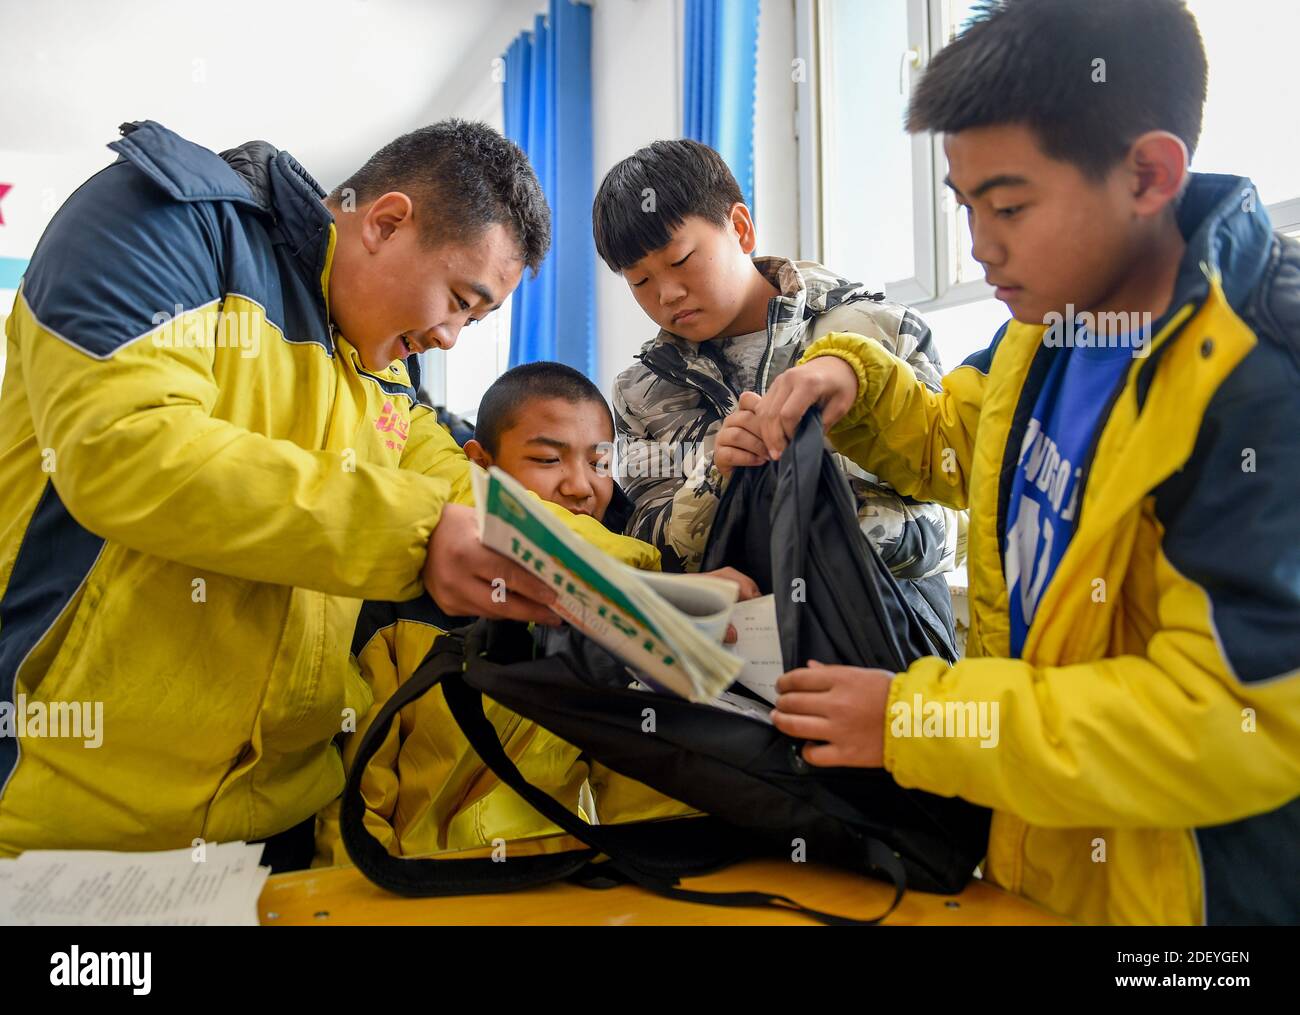 (201202) -- CHIFENG, Dec. 2, 2020 (Xinhua) -- Sun Simiao (1st, L) and his classmates help Wang Aoran pack his schoolbag in the school at Chifeng City, north China's Inner Mongolia Autonomous Region, Nov. 25, 2020.  Wang Aoran, 15, has been disabled in action by creatine kinase abnormality since he was a child. When in the second grade of primary school, he received help from schoolmate Sun Simiao, who voluntarily began to carry him from the school gate to his classroom. He has been helping him ever since.       The two became inseparable best friends. They went to the same middle school, both Stock Photo